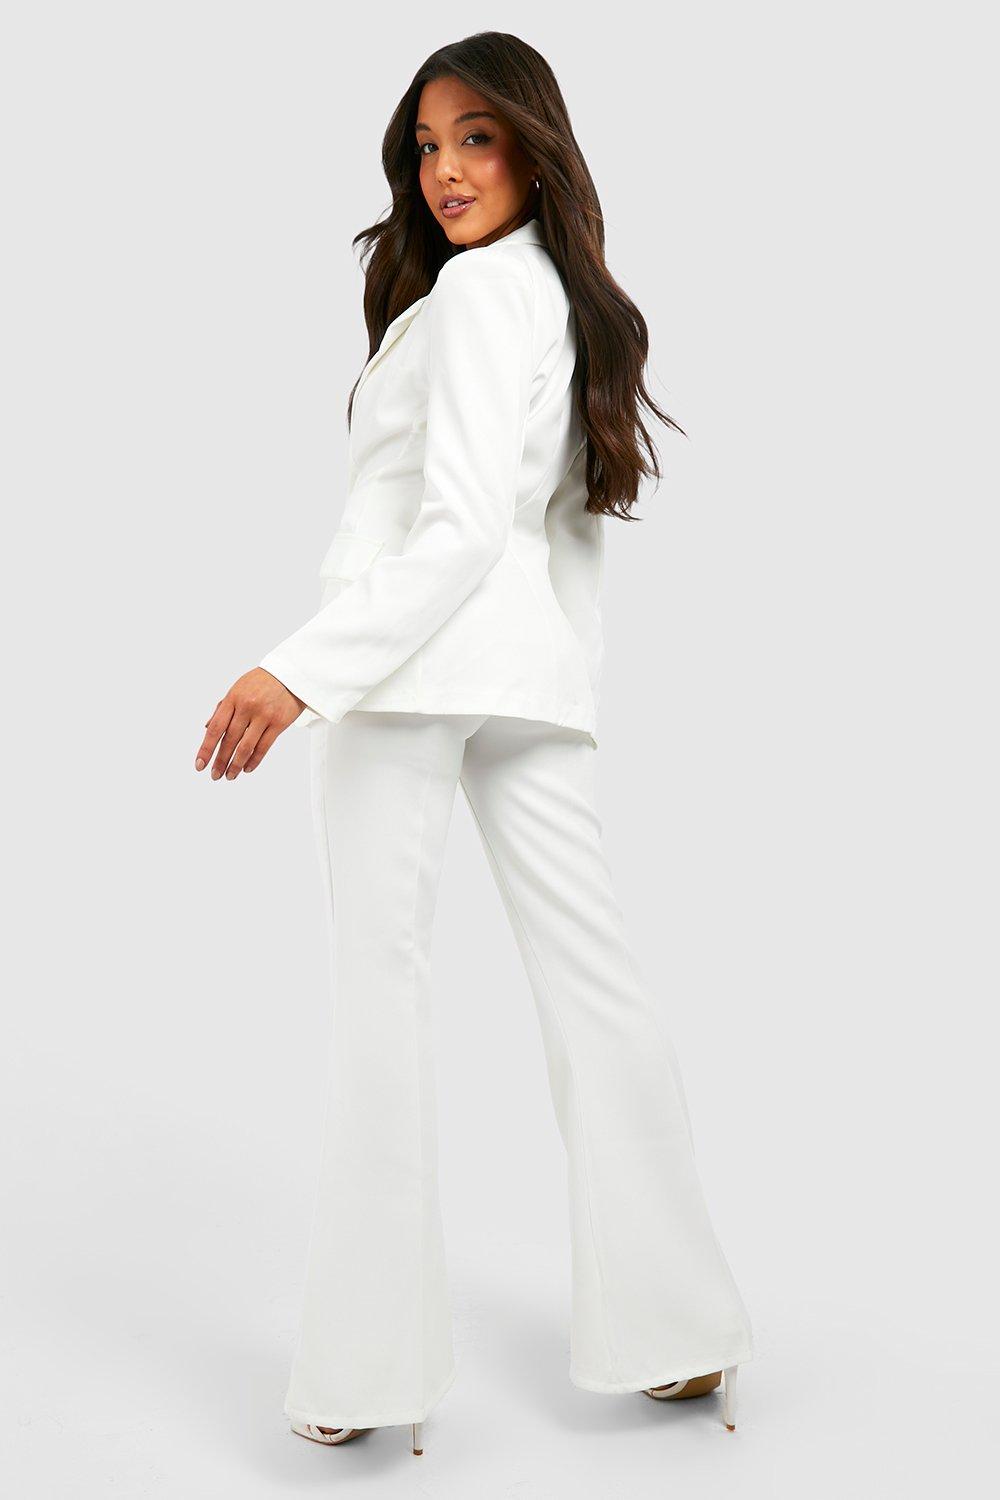 white #flare #pants white flare pants pair perfectly with any